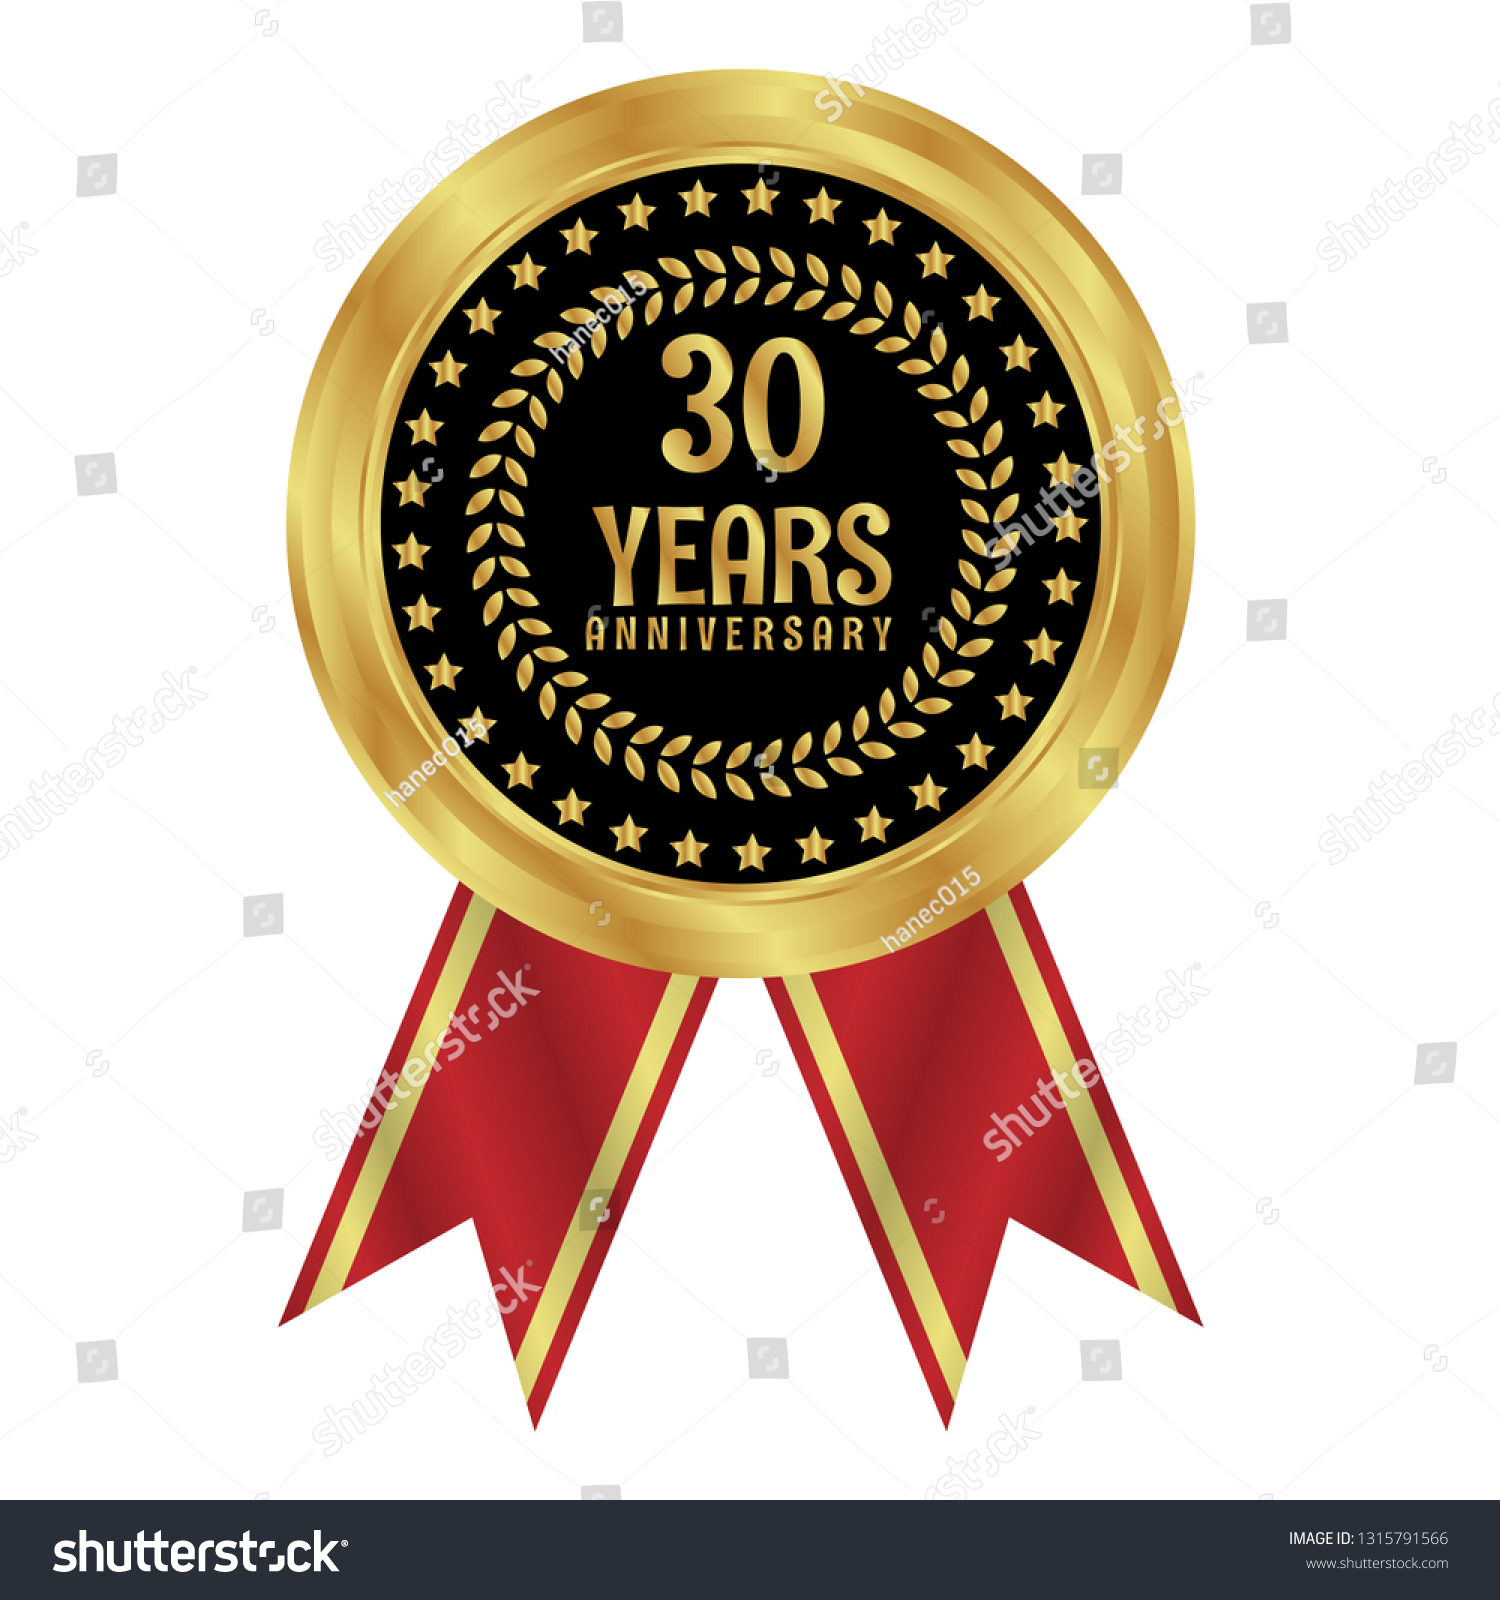 SVG of Gold button with 30 years anniversary . emblem, label, badge,sticker, logo. Designed for celebration or anniversary svg